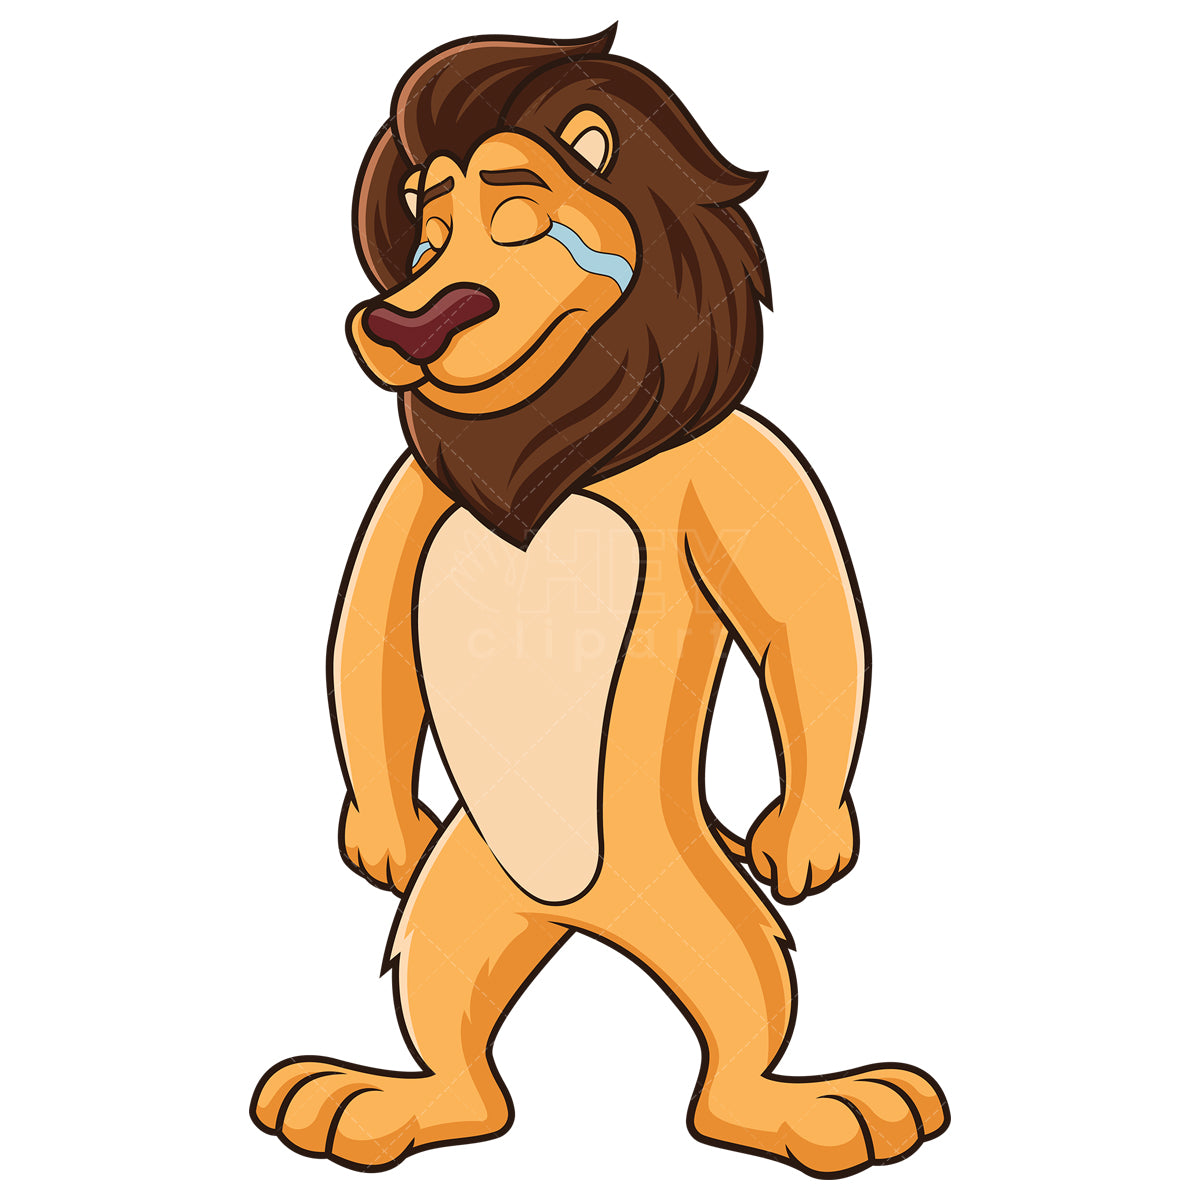 Royalty-free stock vector illustration of a lion crying.